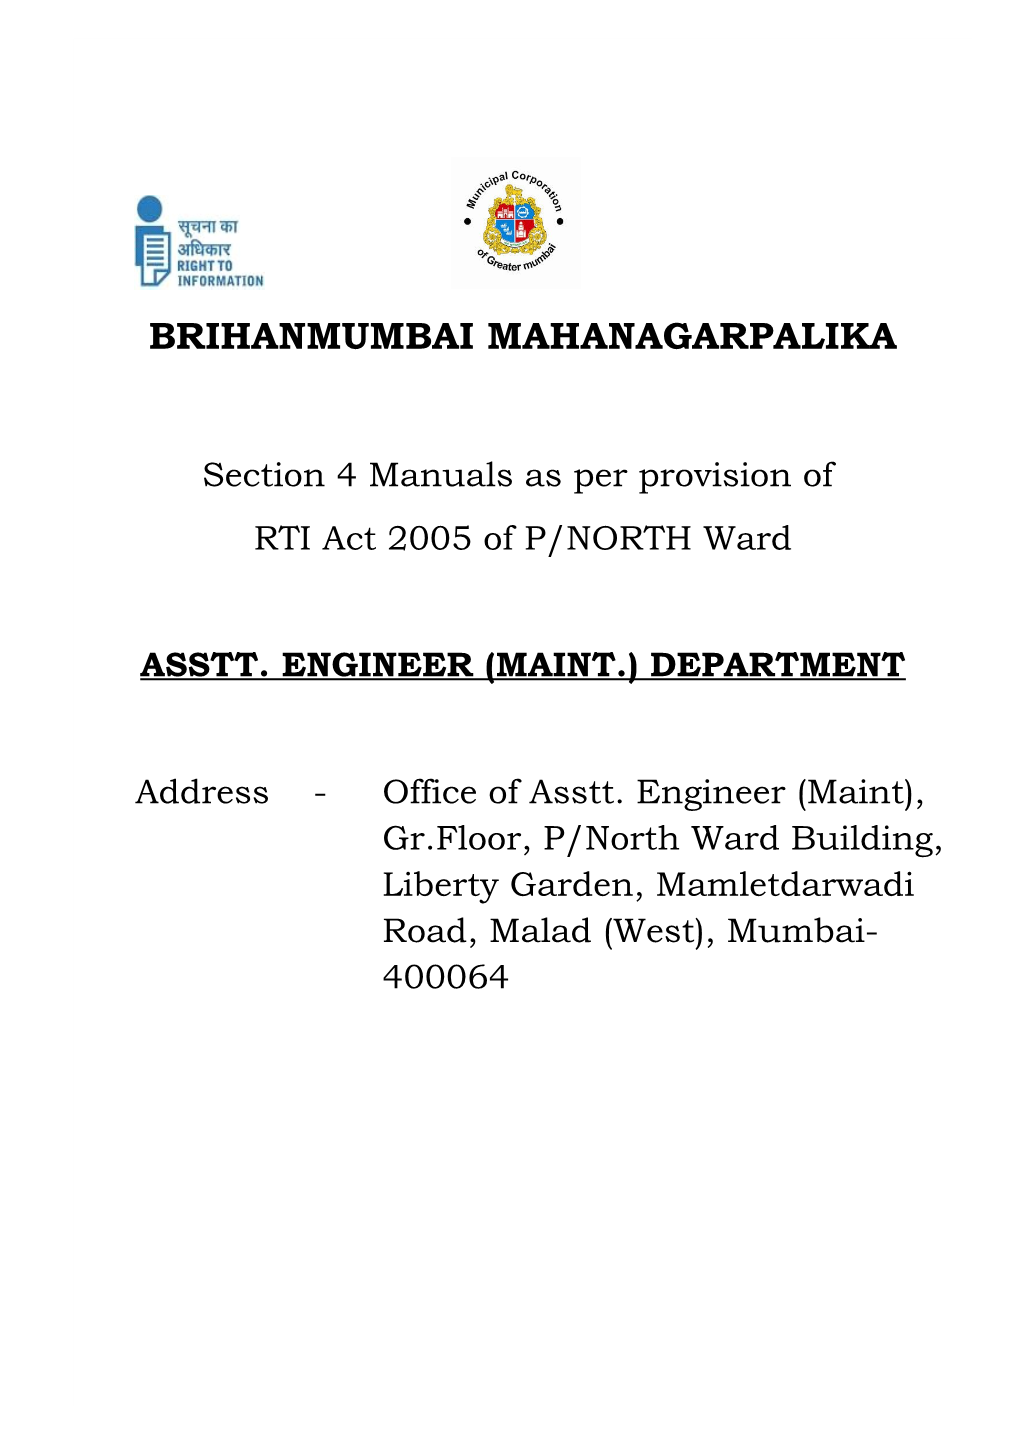 Section 4 Manuals As Per Provision of RTI Act 2005 of P/NORTH Ward